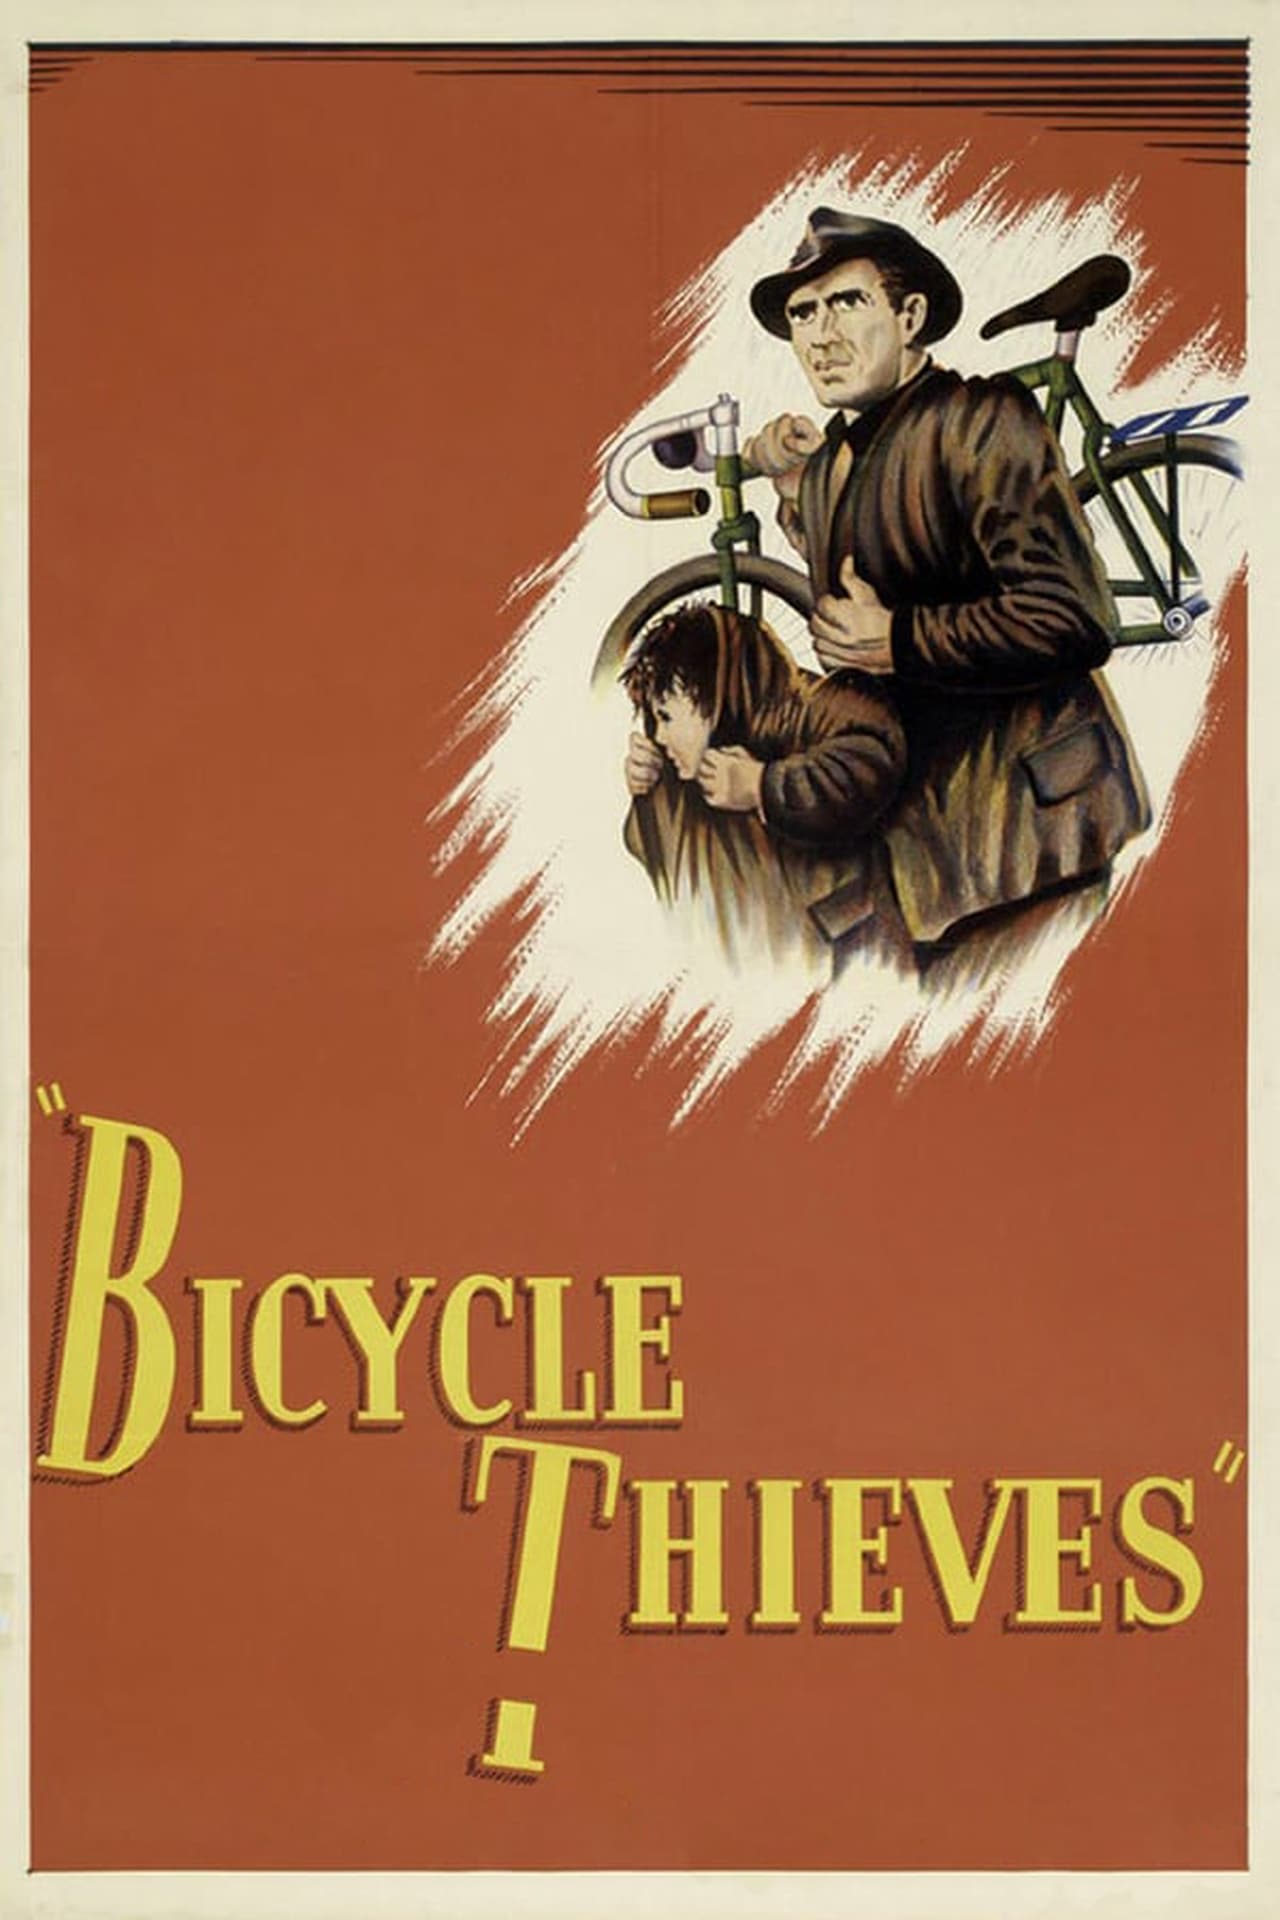 Bicycle Thieves (1949)